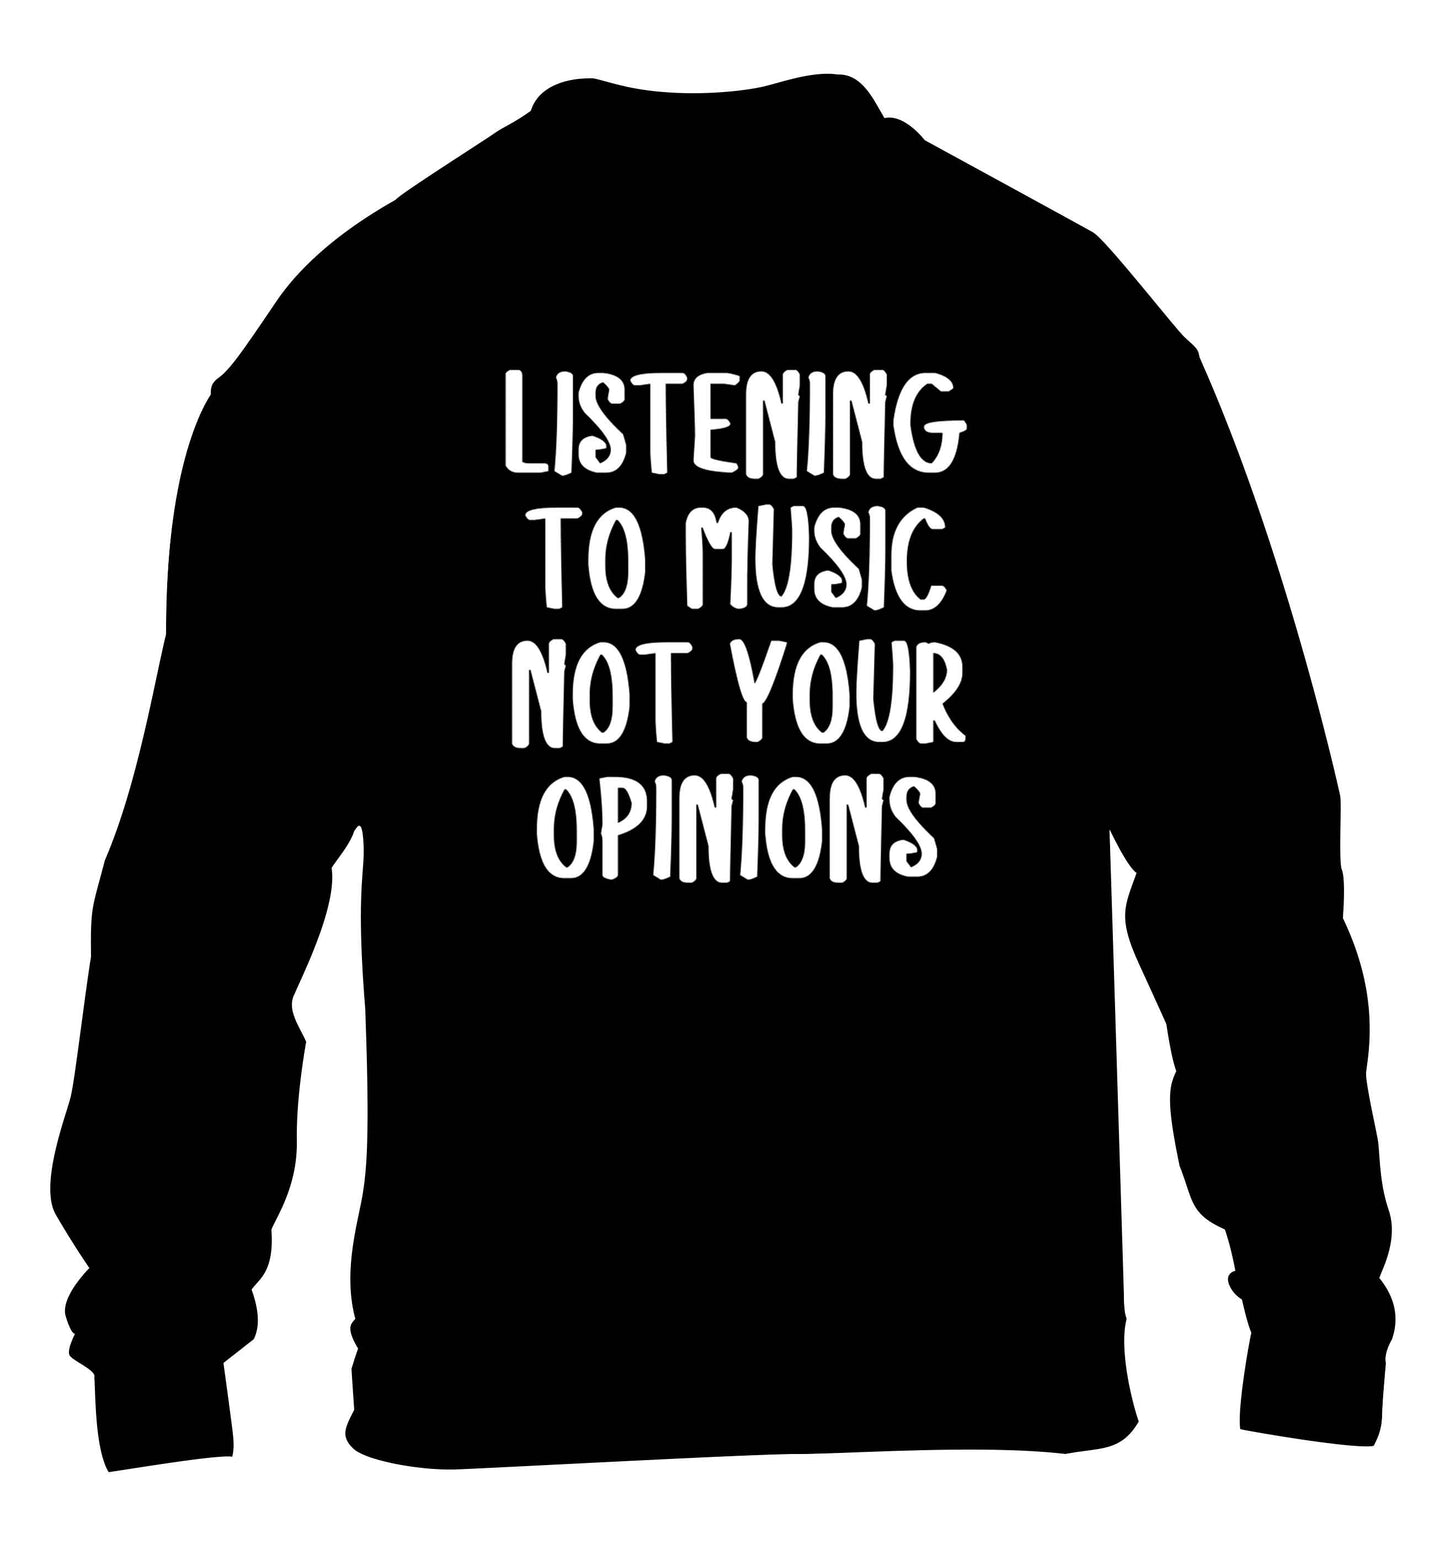 Listening to music not your opinions children's black sweater 12-13 Years